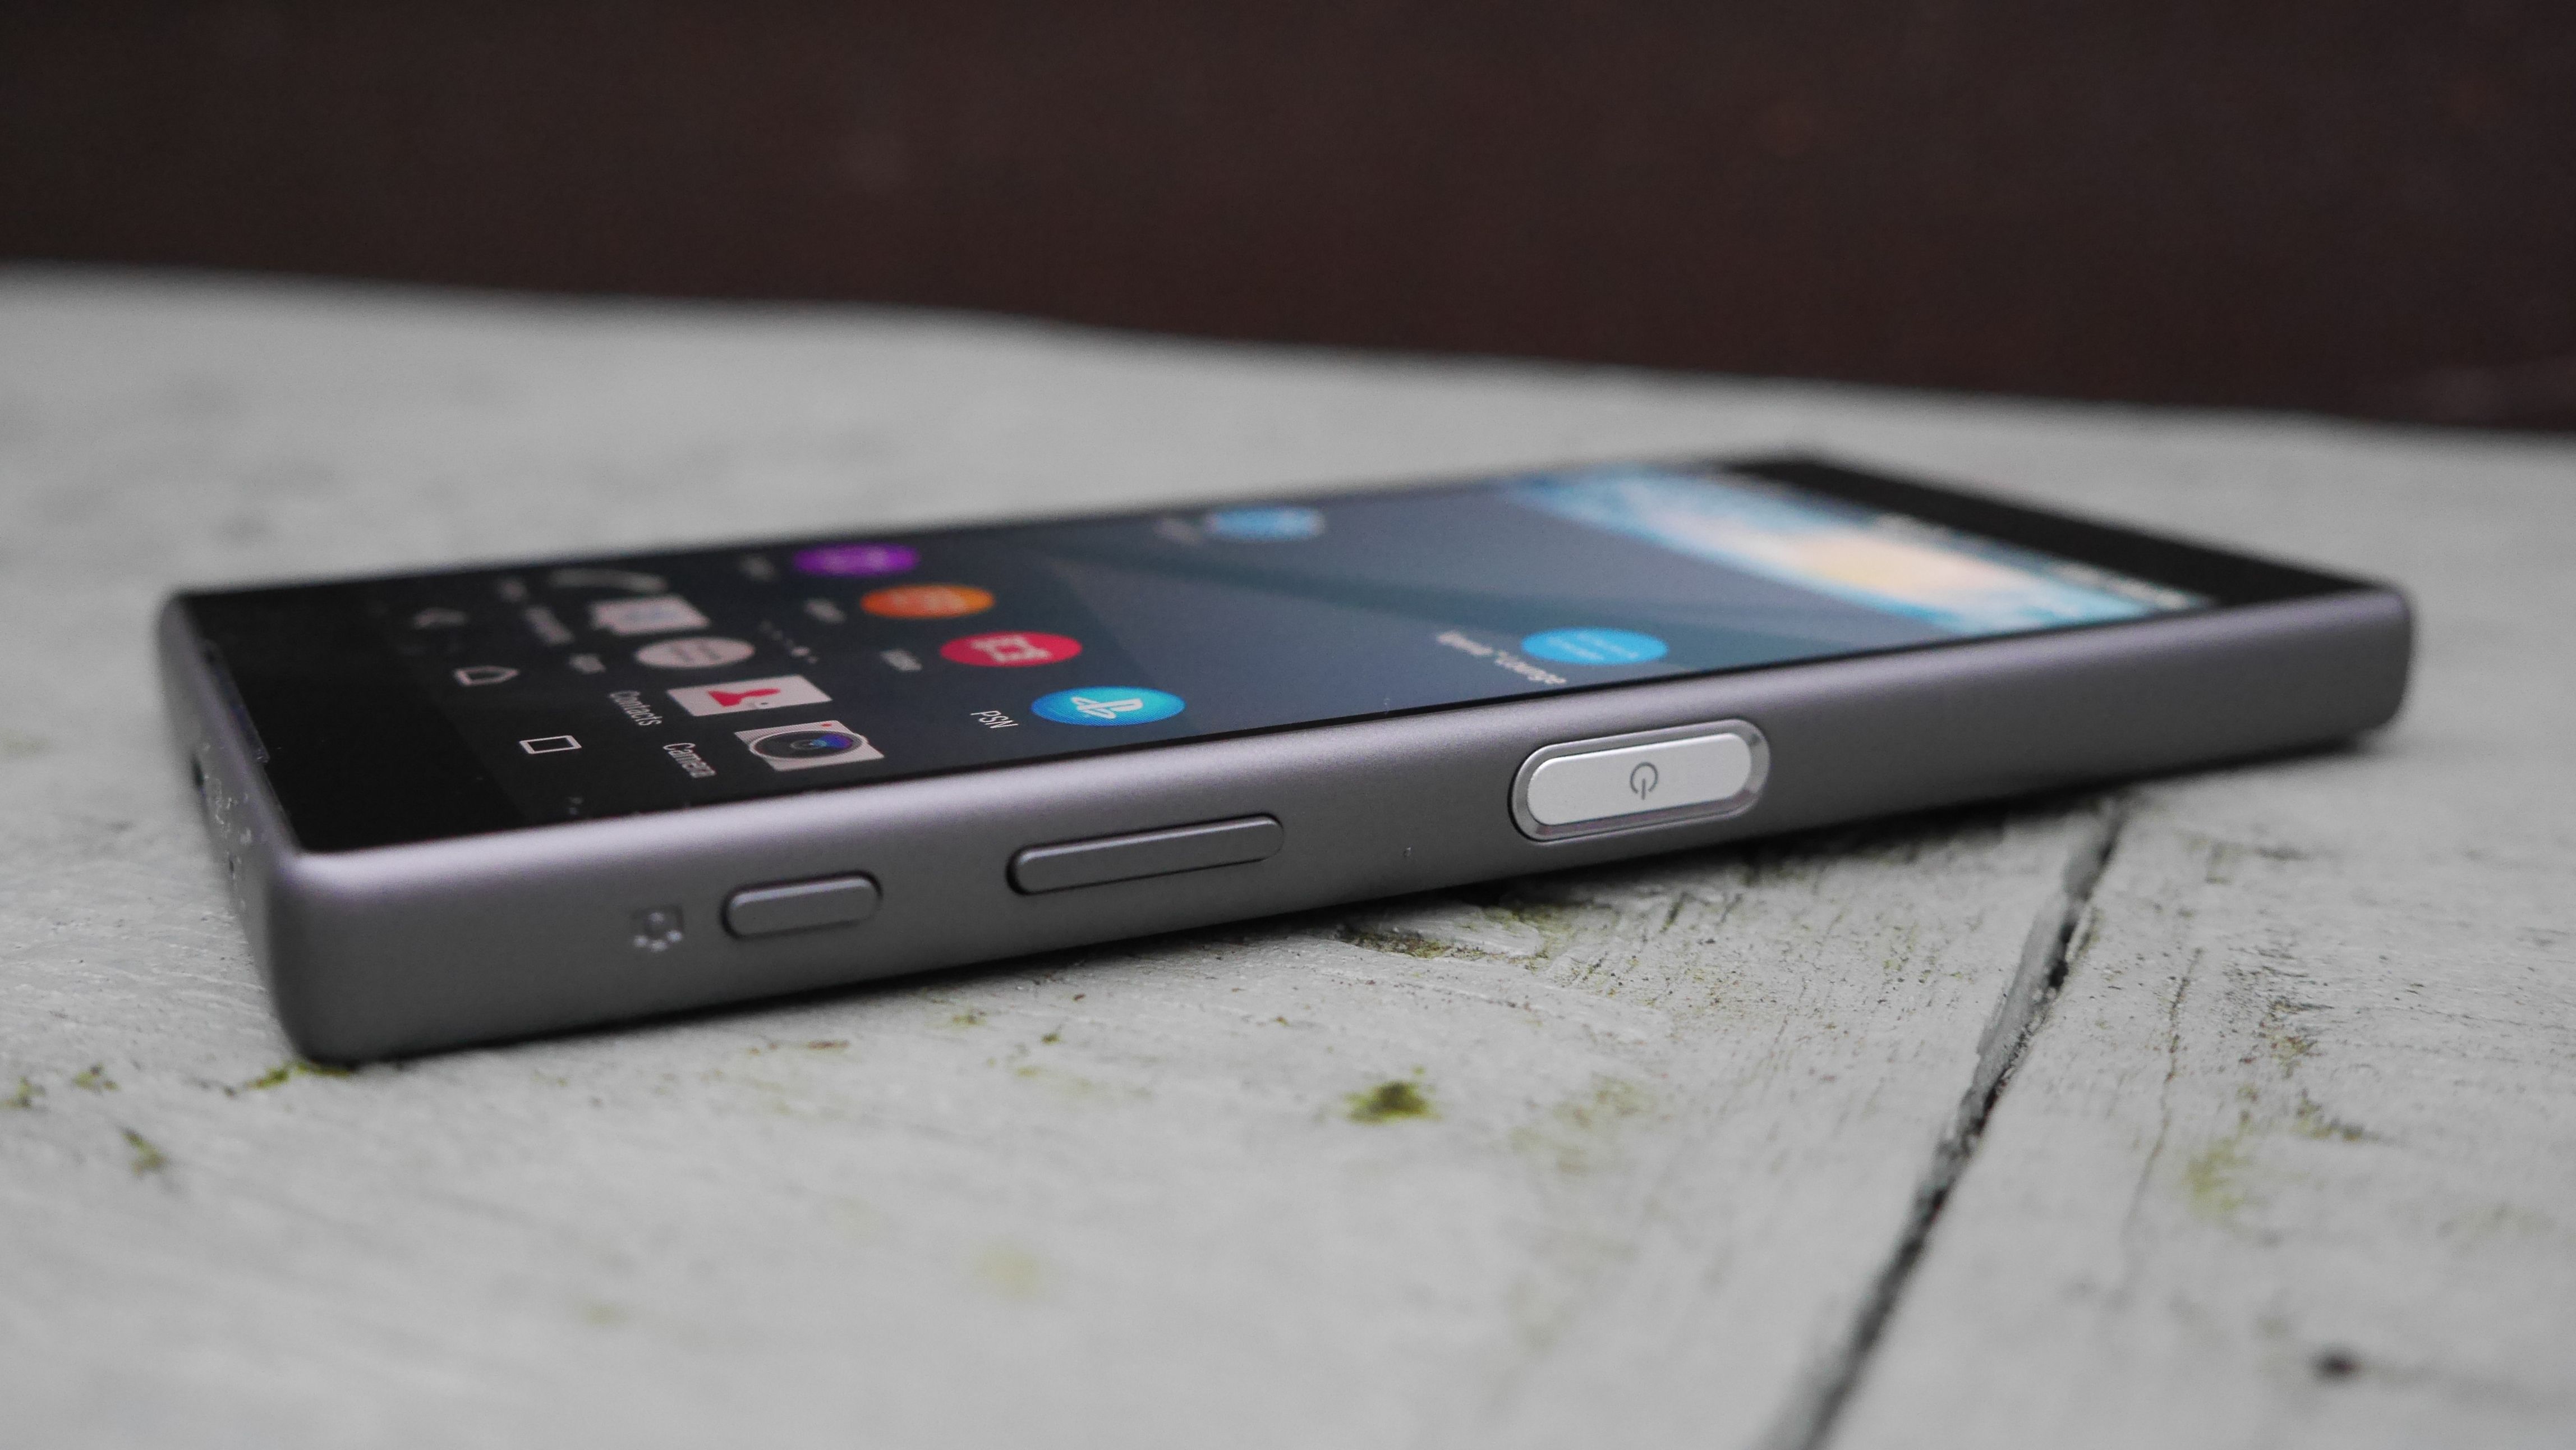 Sony Xperia Z5 Compact Review: Sony's stunning camera is let down